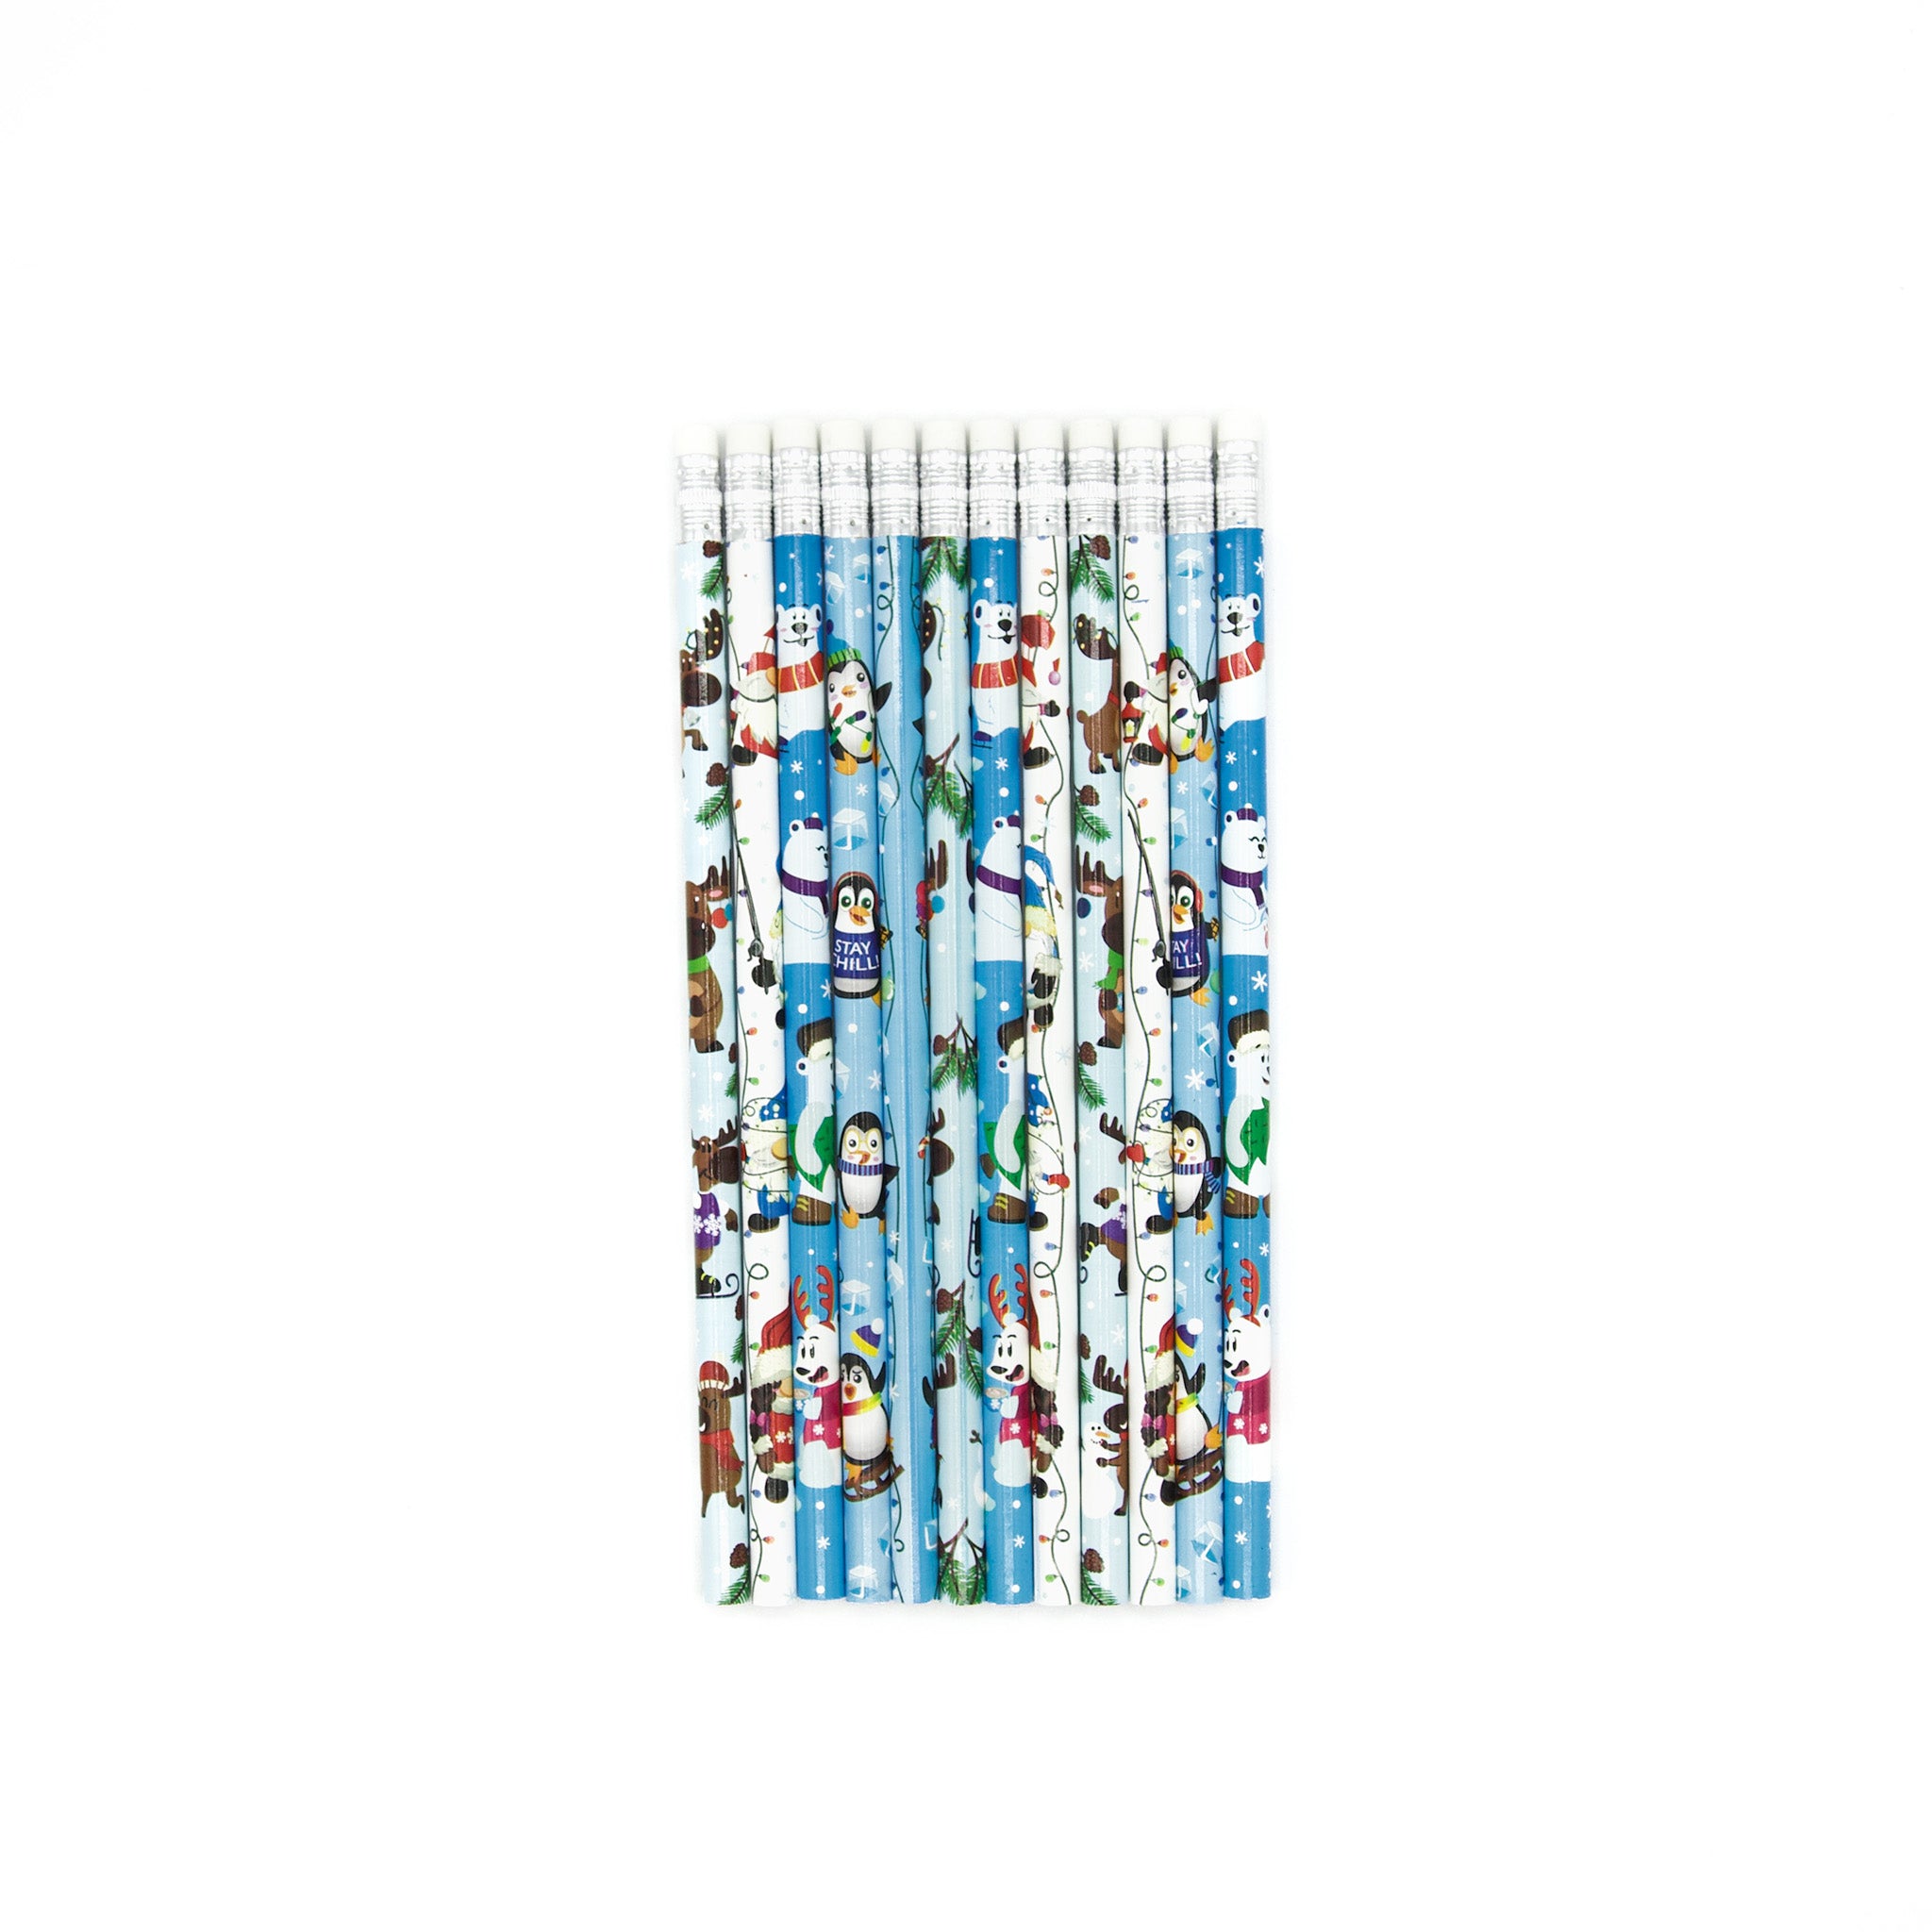 Musgrave Pencil Company Happy Birthday Wishes Pencil, 12 Packs of 12